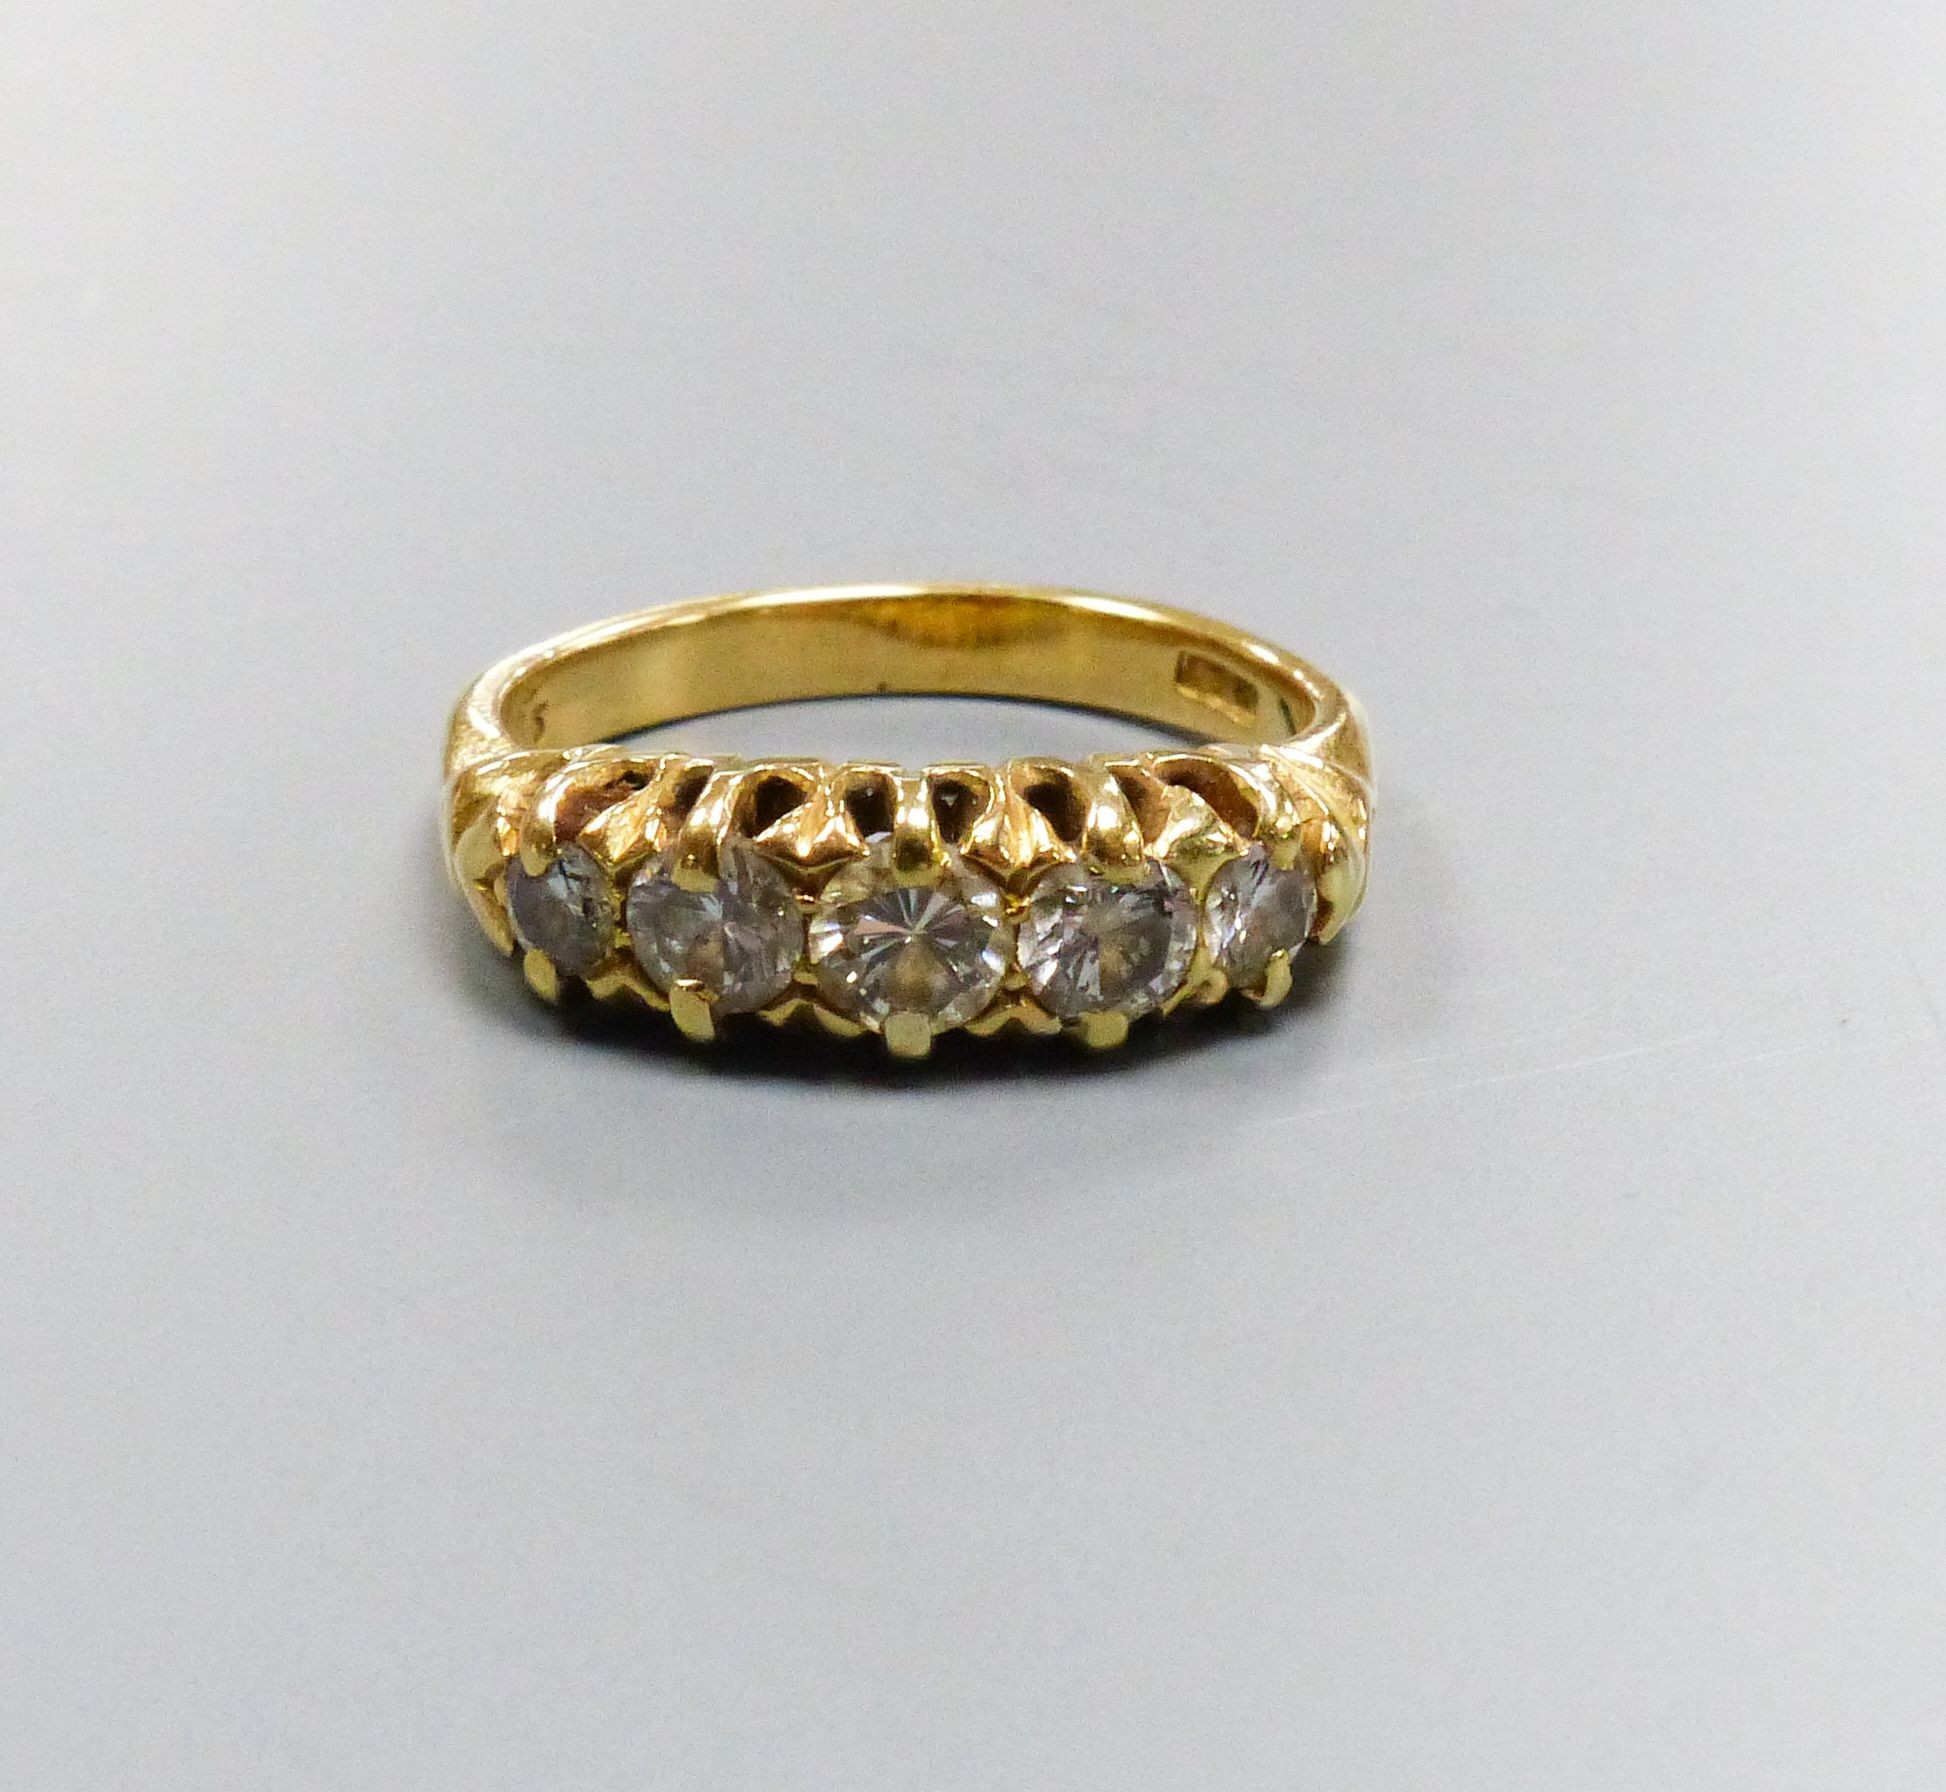 A five-stone diamond ring, 18ct yellow gold setting, claw-set with carved shoulders, size K, gross 5.5 grams.